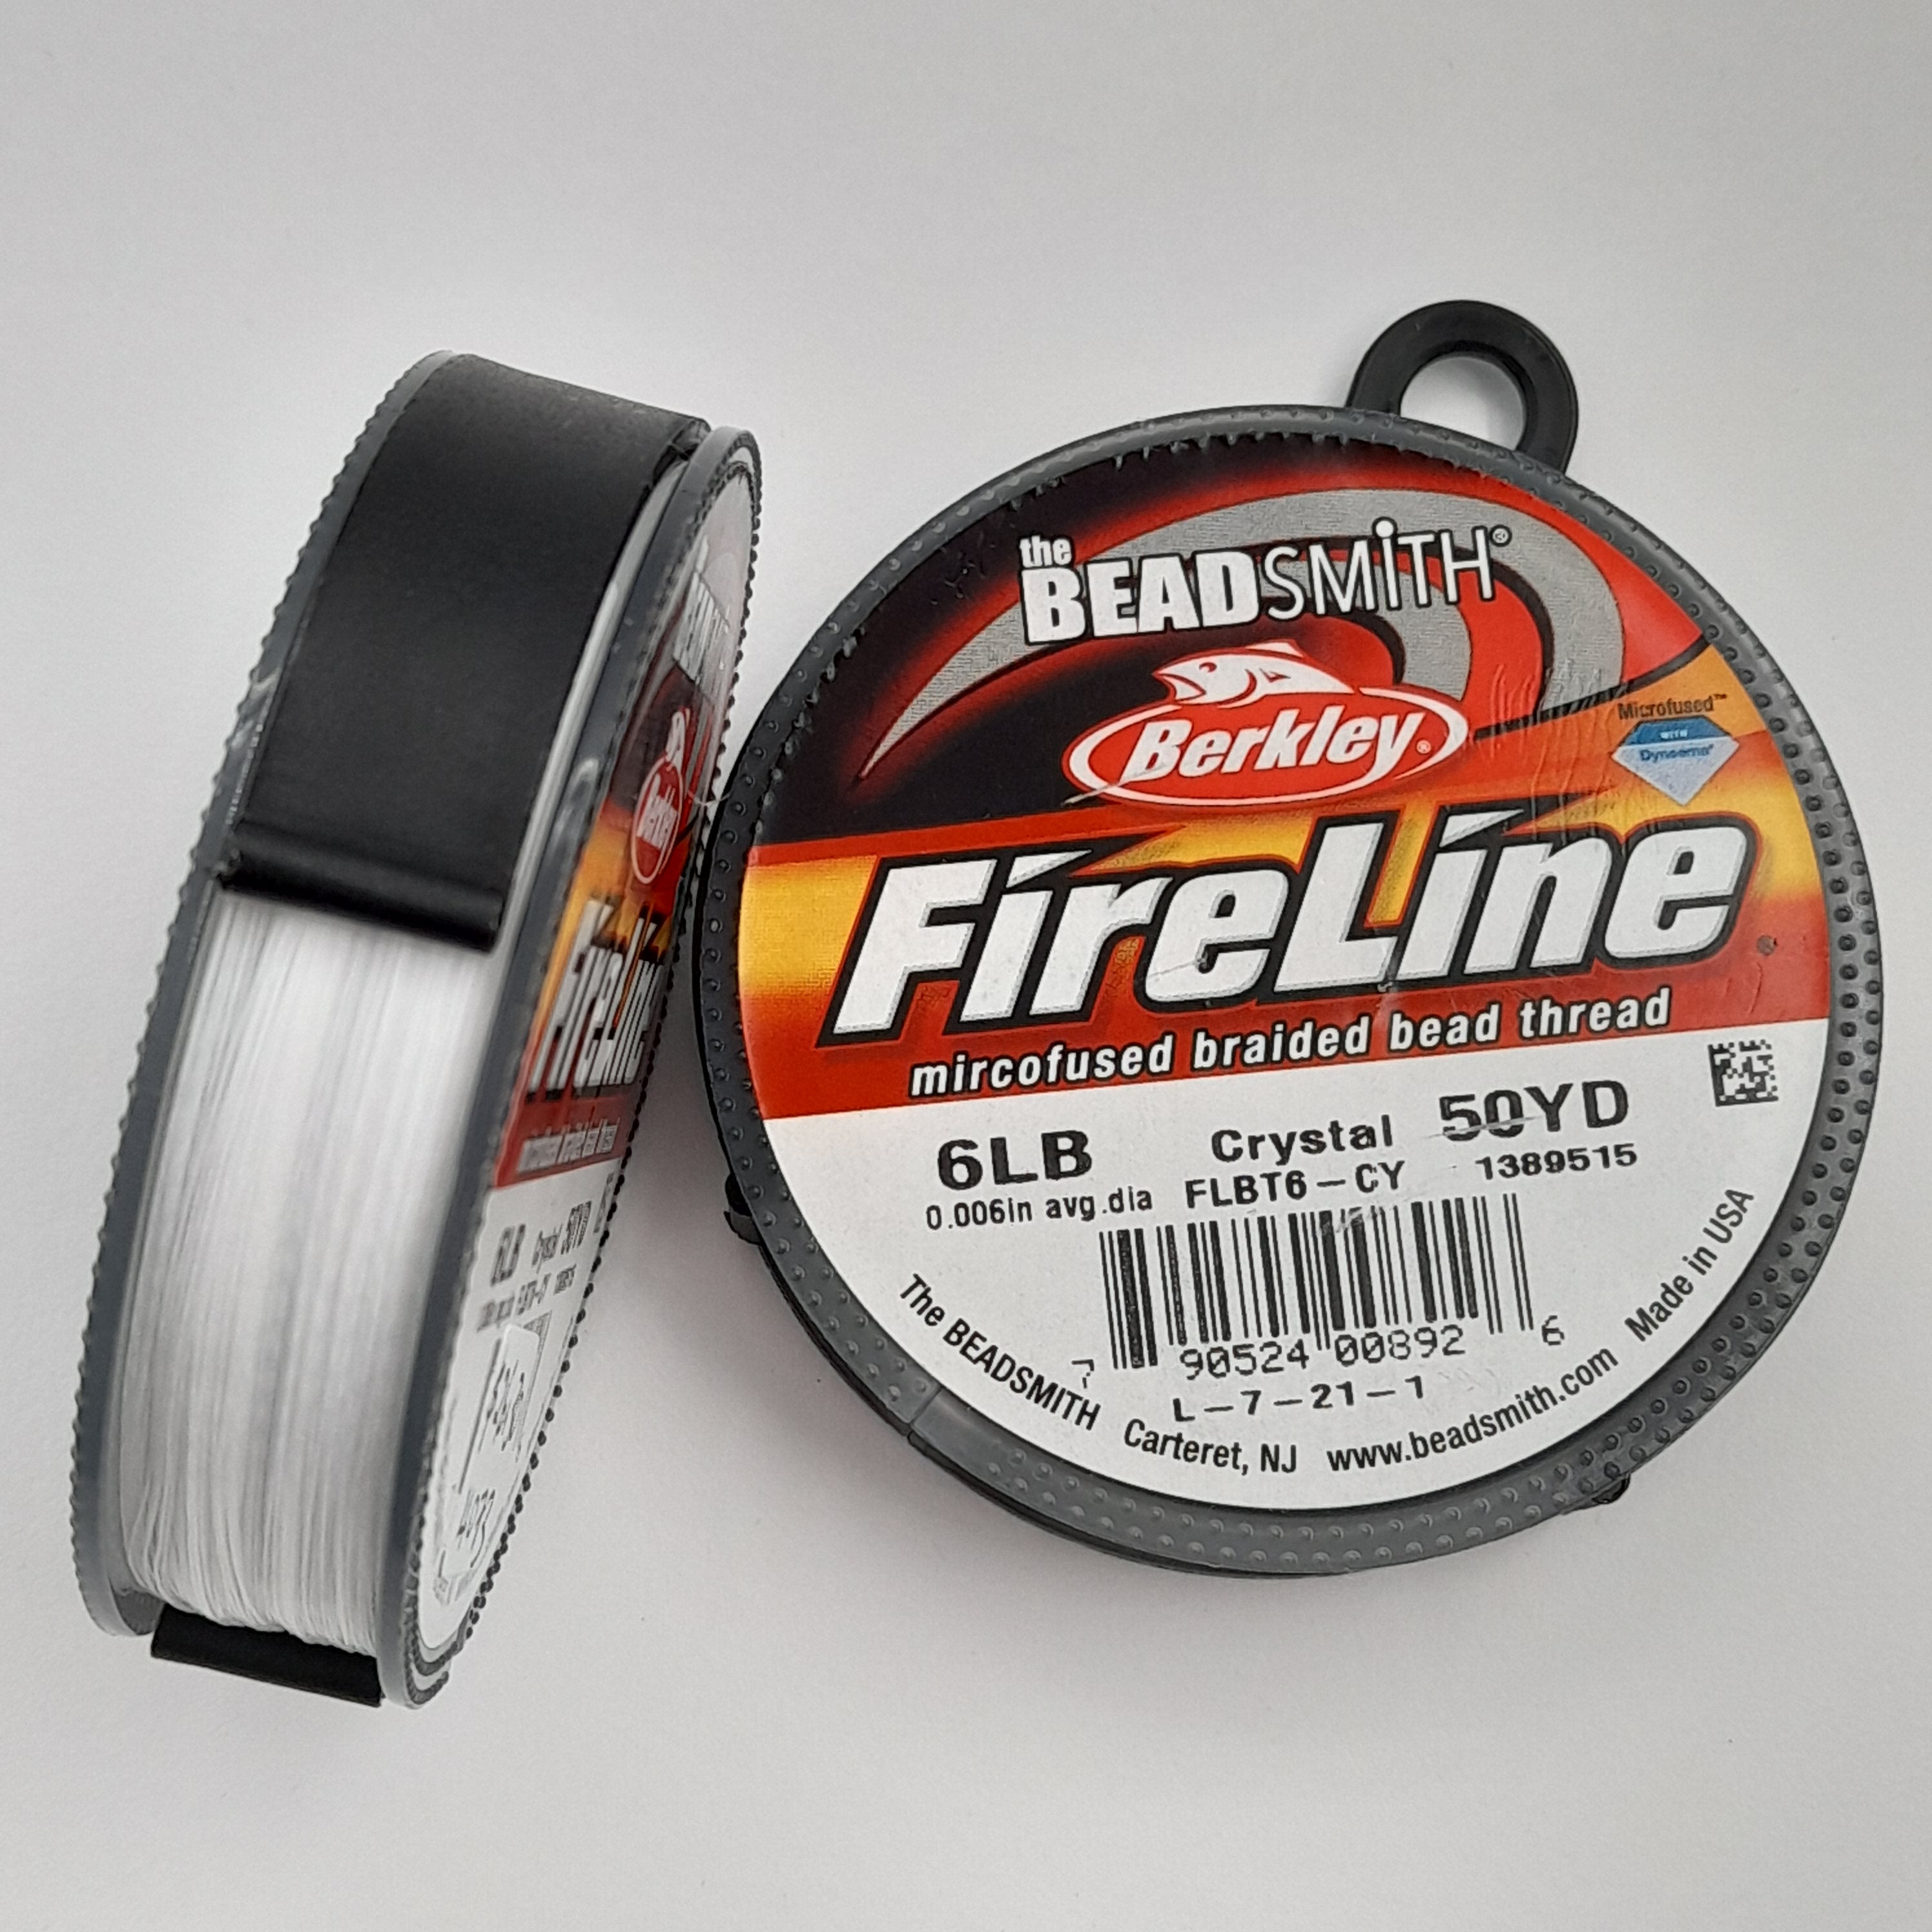 Wholesale Beadsmith Fireline Braided Thread, Crystal Thread 50 Yards Size  6lb Test, Wholesale Beading Supplies, Jewelry Making Chains Supplies  Wholesaler